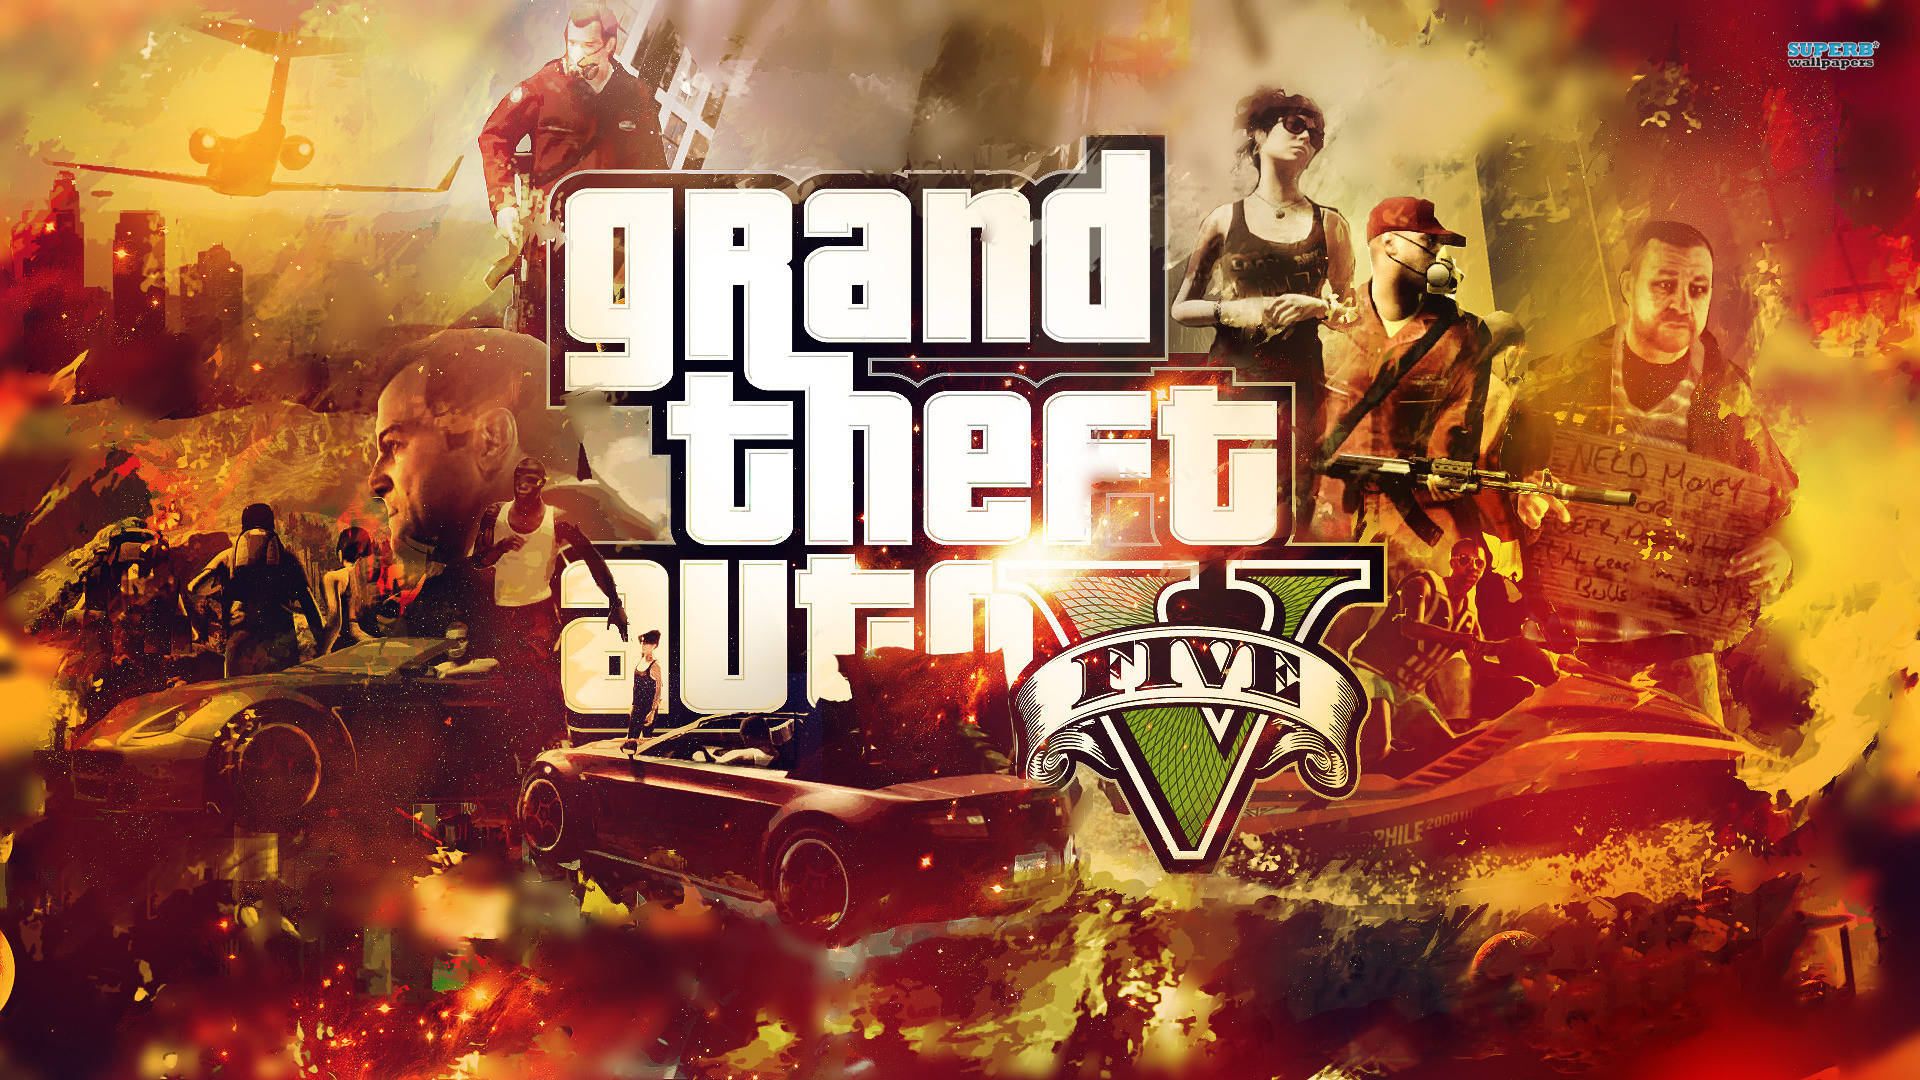 Grand Theft Auto V Fiery Background Wallpaper